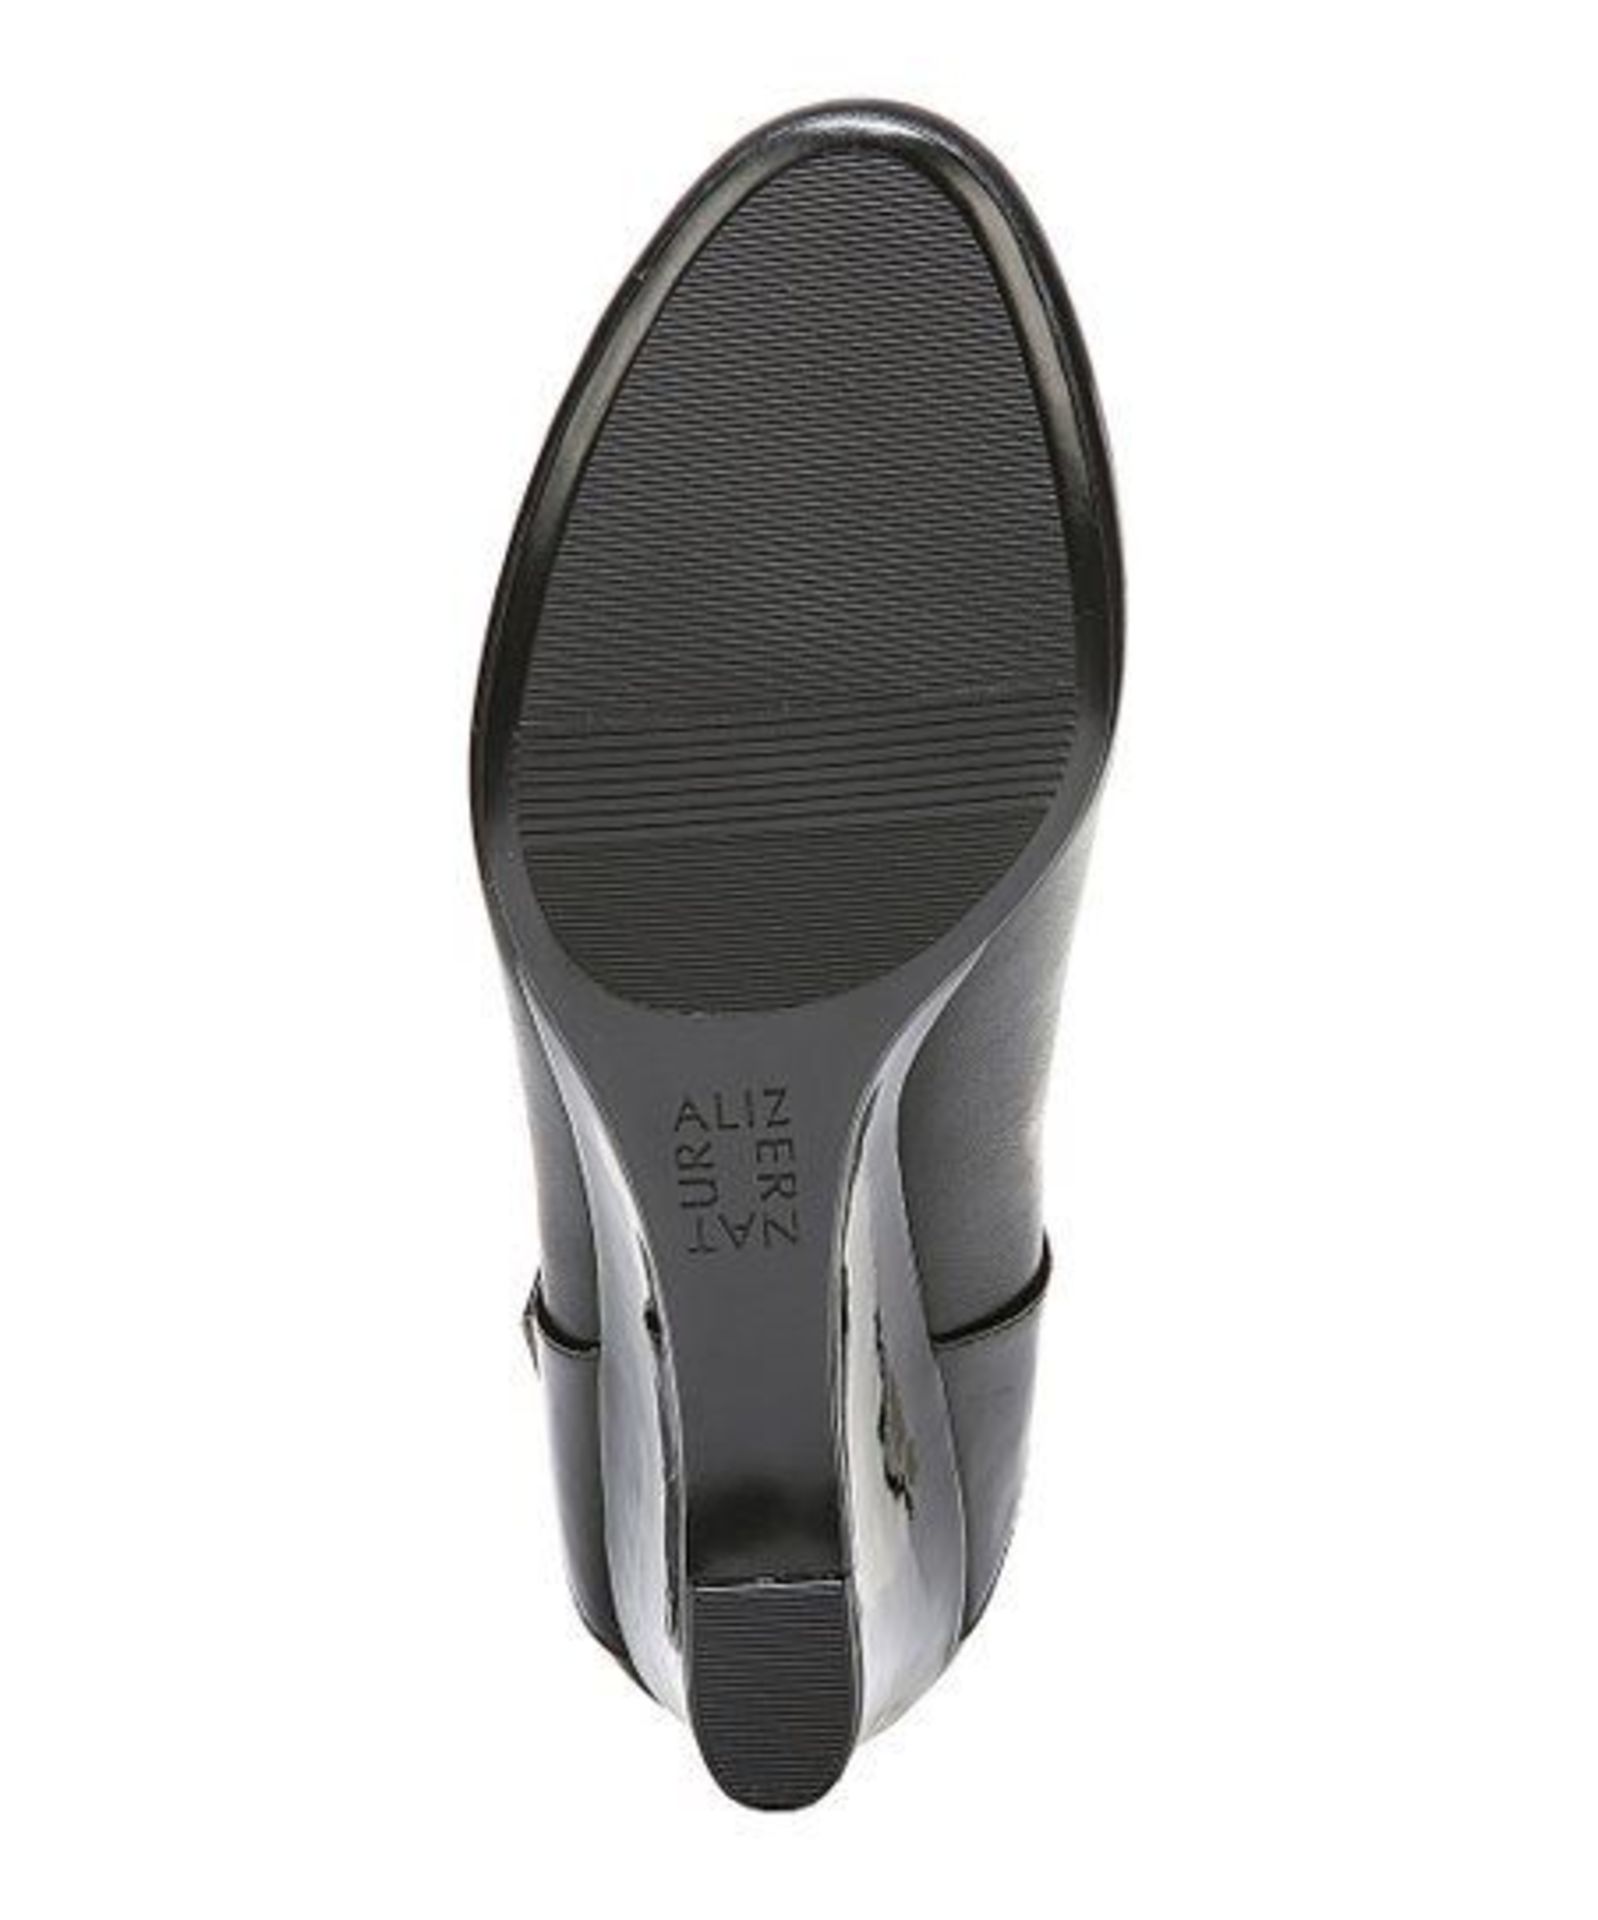 Naturalizer, Black Hester Pump, Size Uk 3.5-4 Eur 35.5 (New With Box) [Ref: 51277289 B] - Image 5 of 5